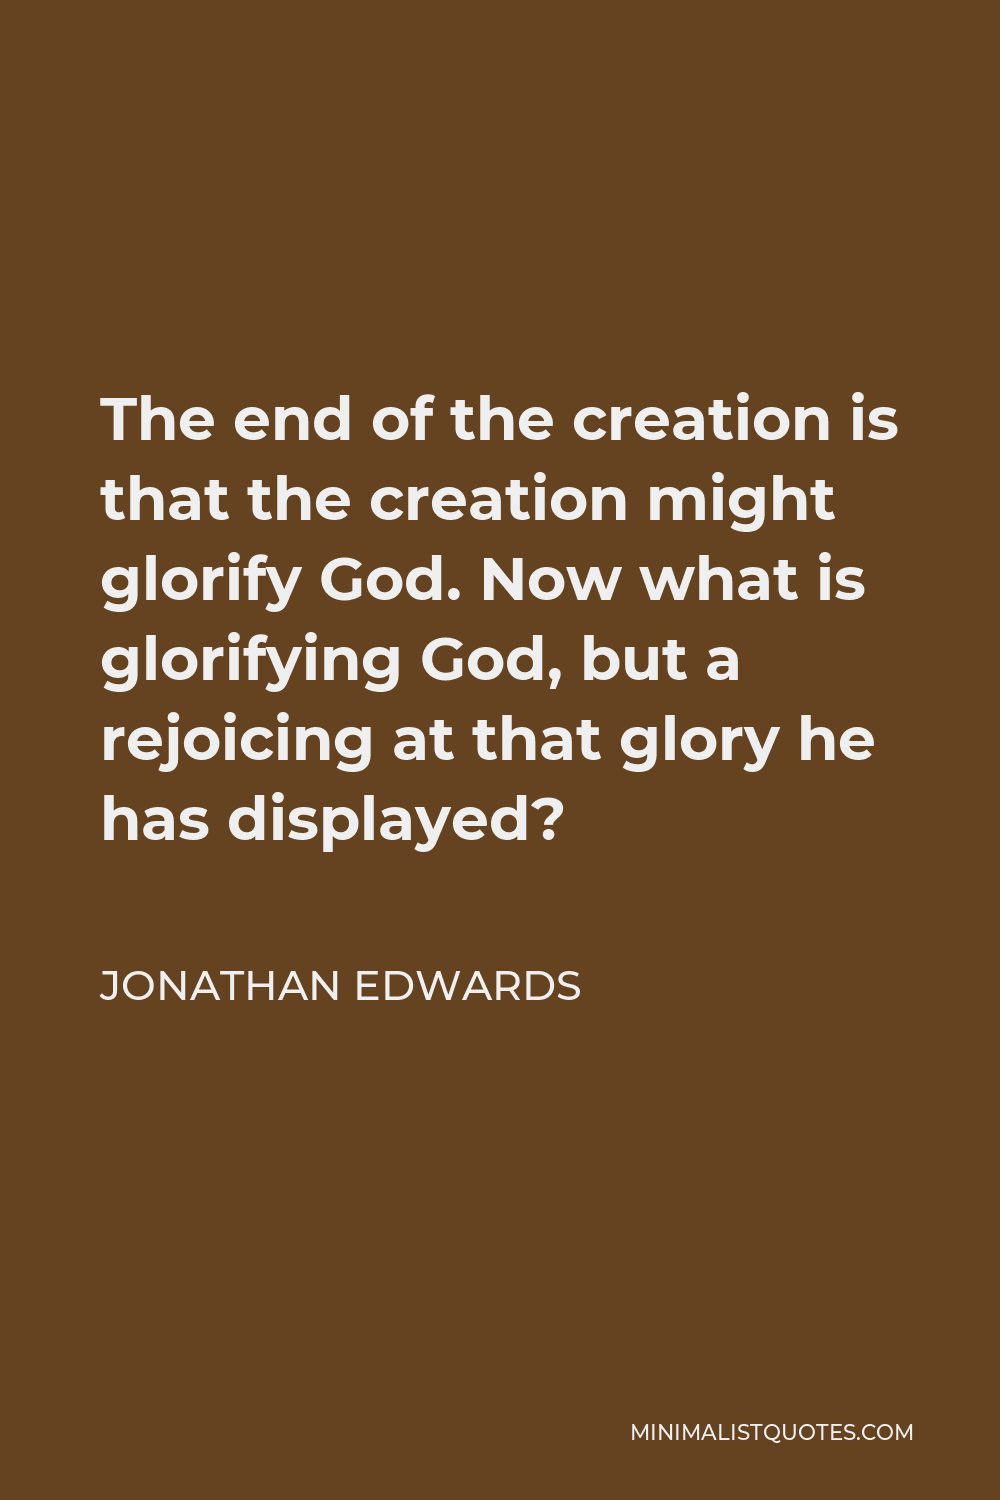 Jonathan Edwards Quote - The end of the creation is that the creation might glorify God. Now what is glorifying God, but a rejoicing at that glory he has displayed?